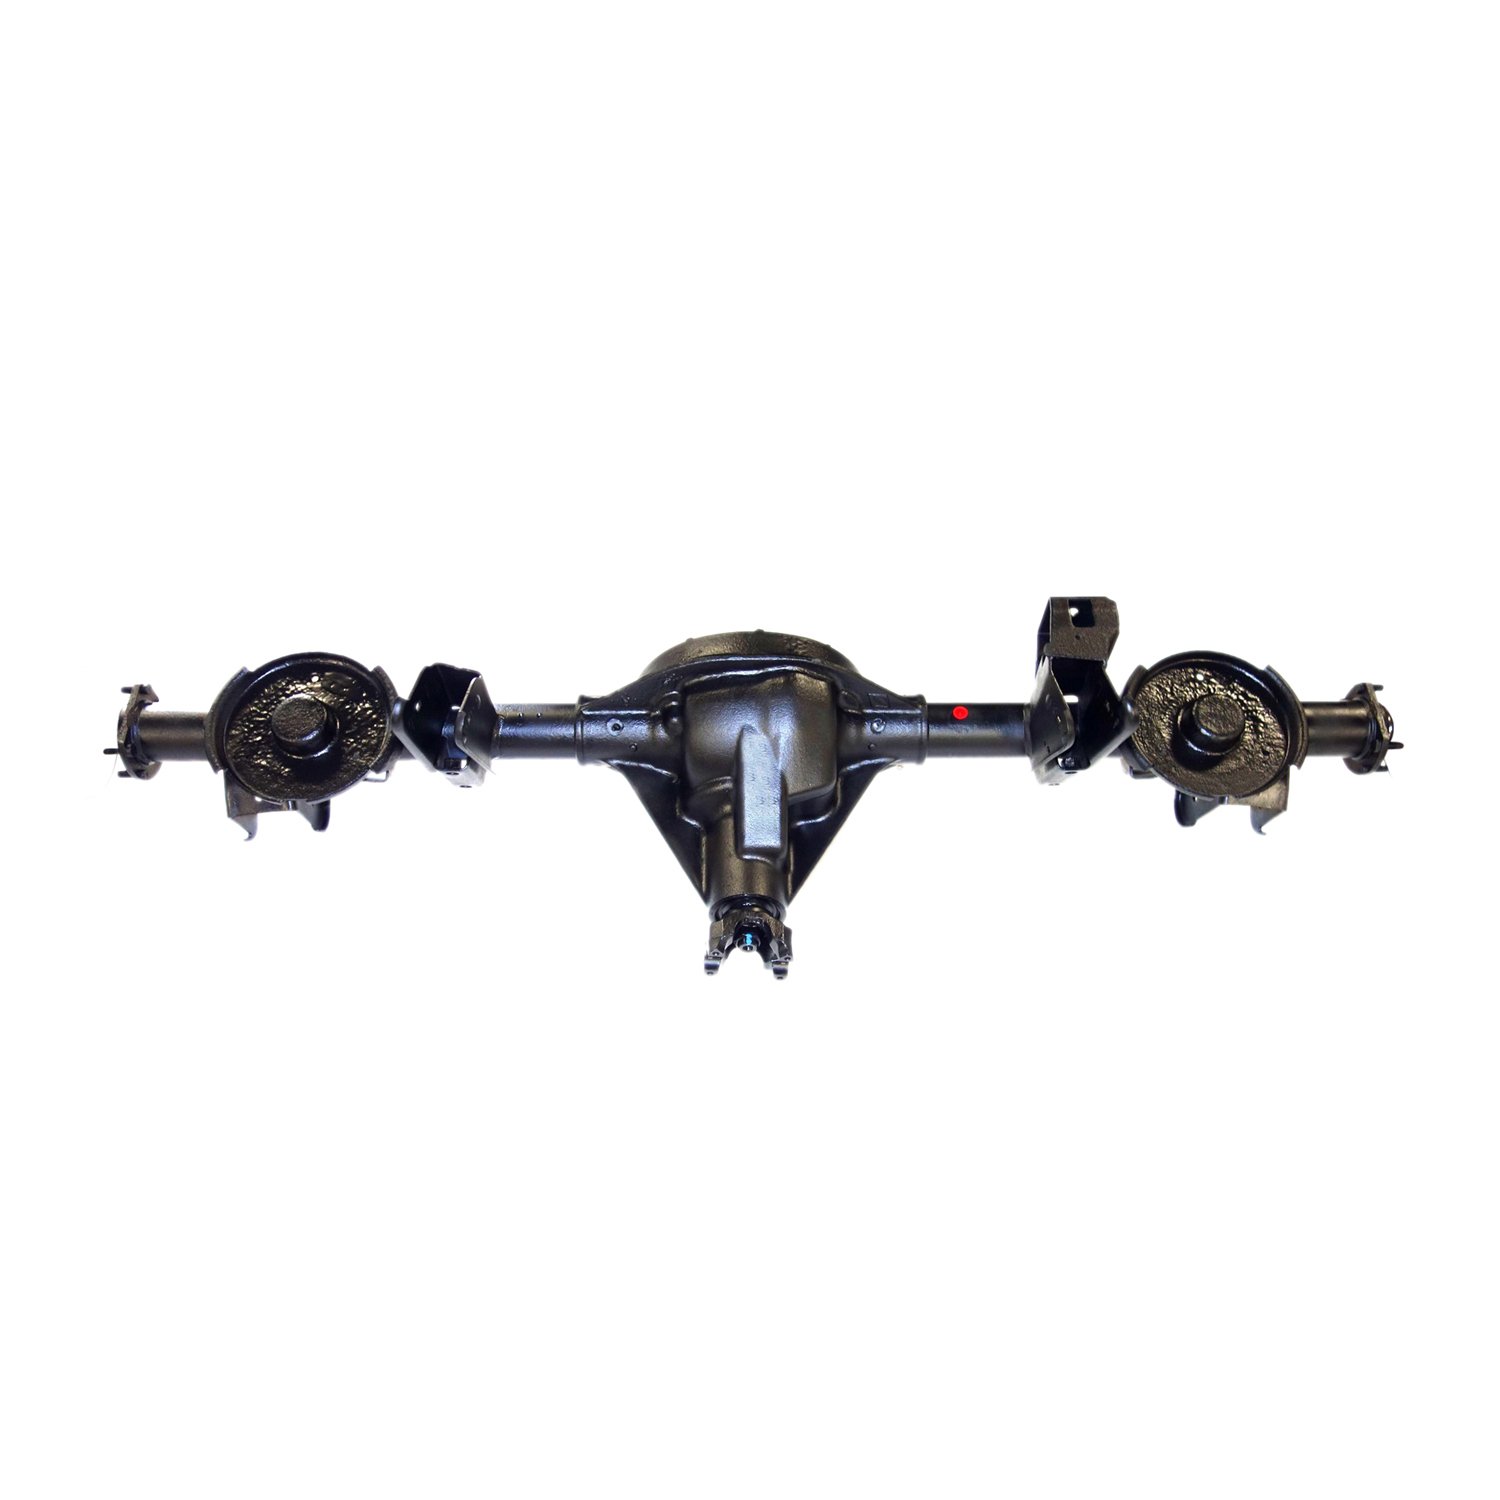 Remanufactured Complete Axle Assembly for Dana 35 90-95 Wrangler 3.55 w/o ABS, Posi LSD